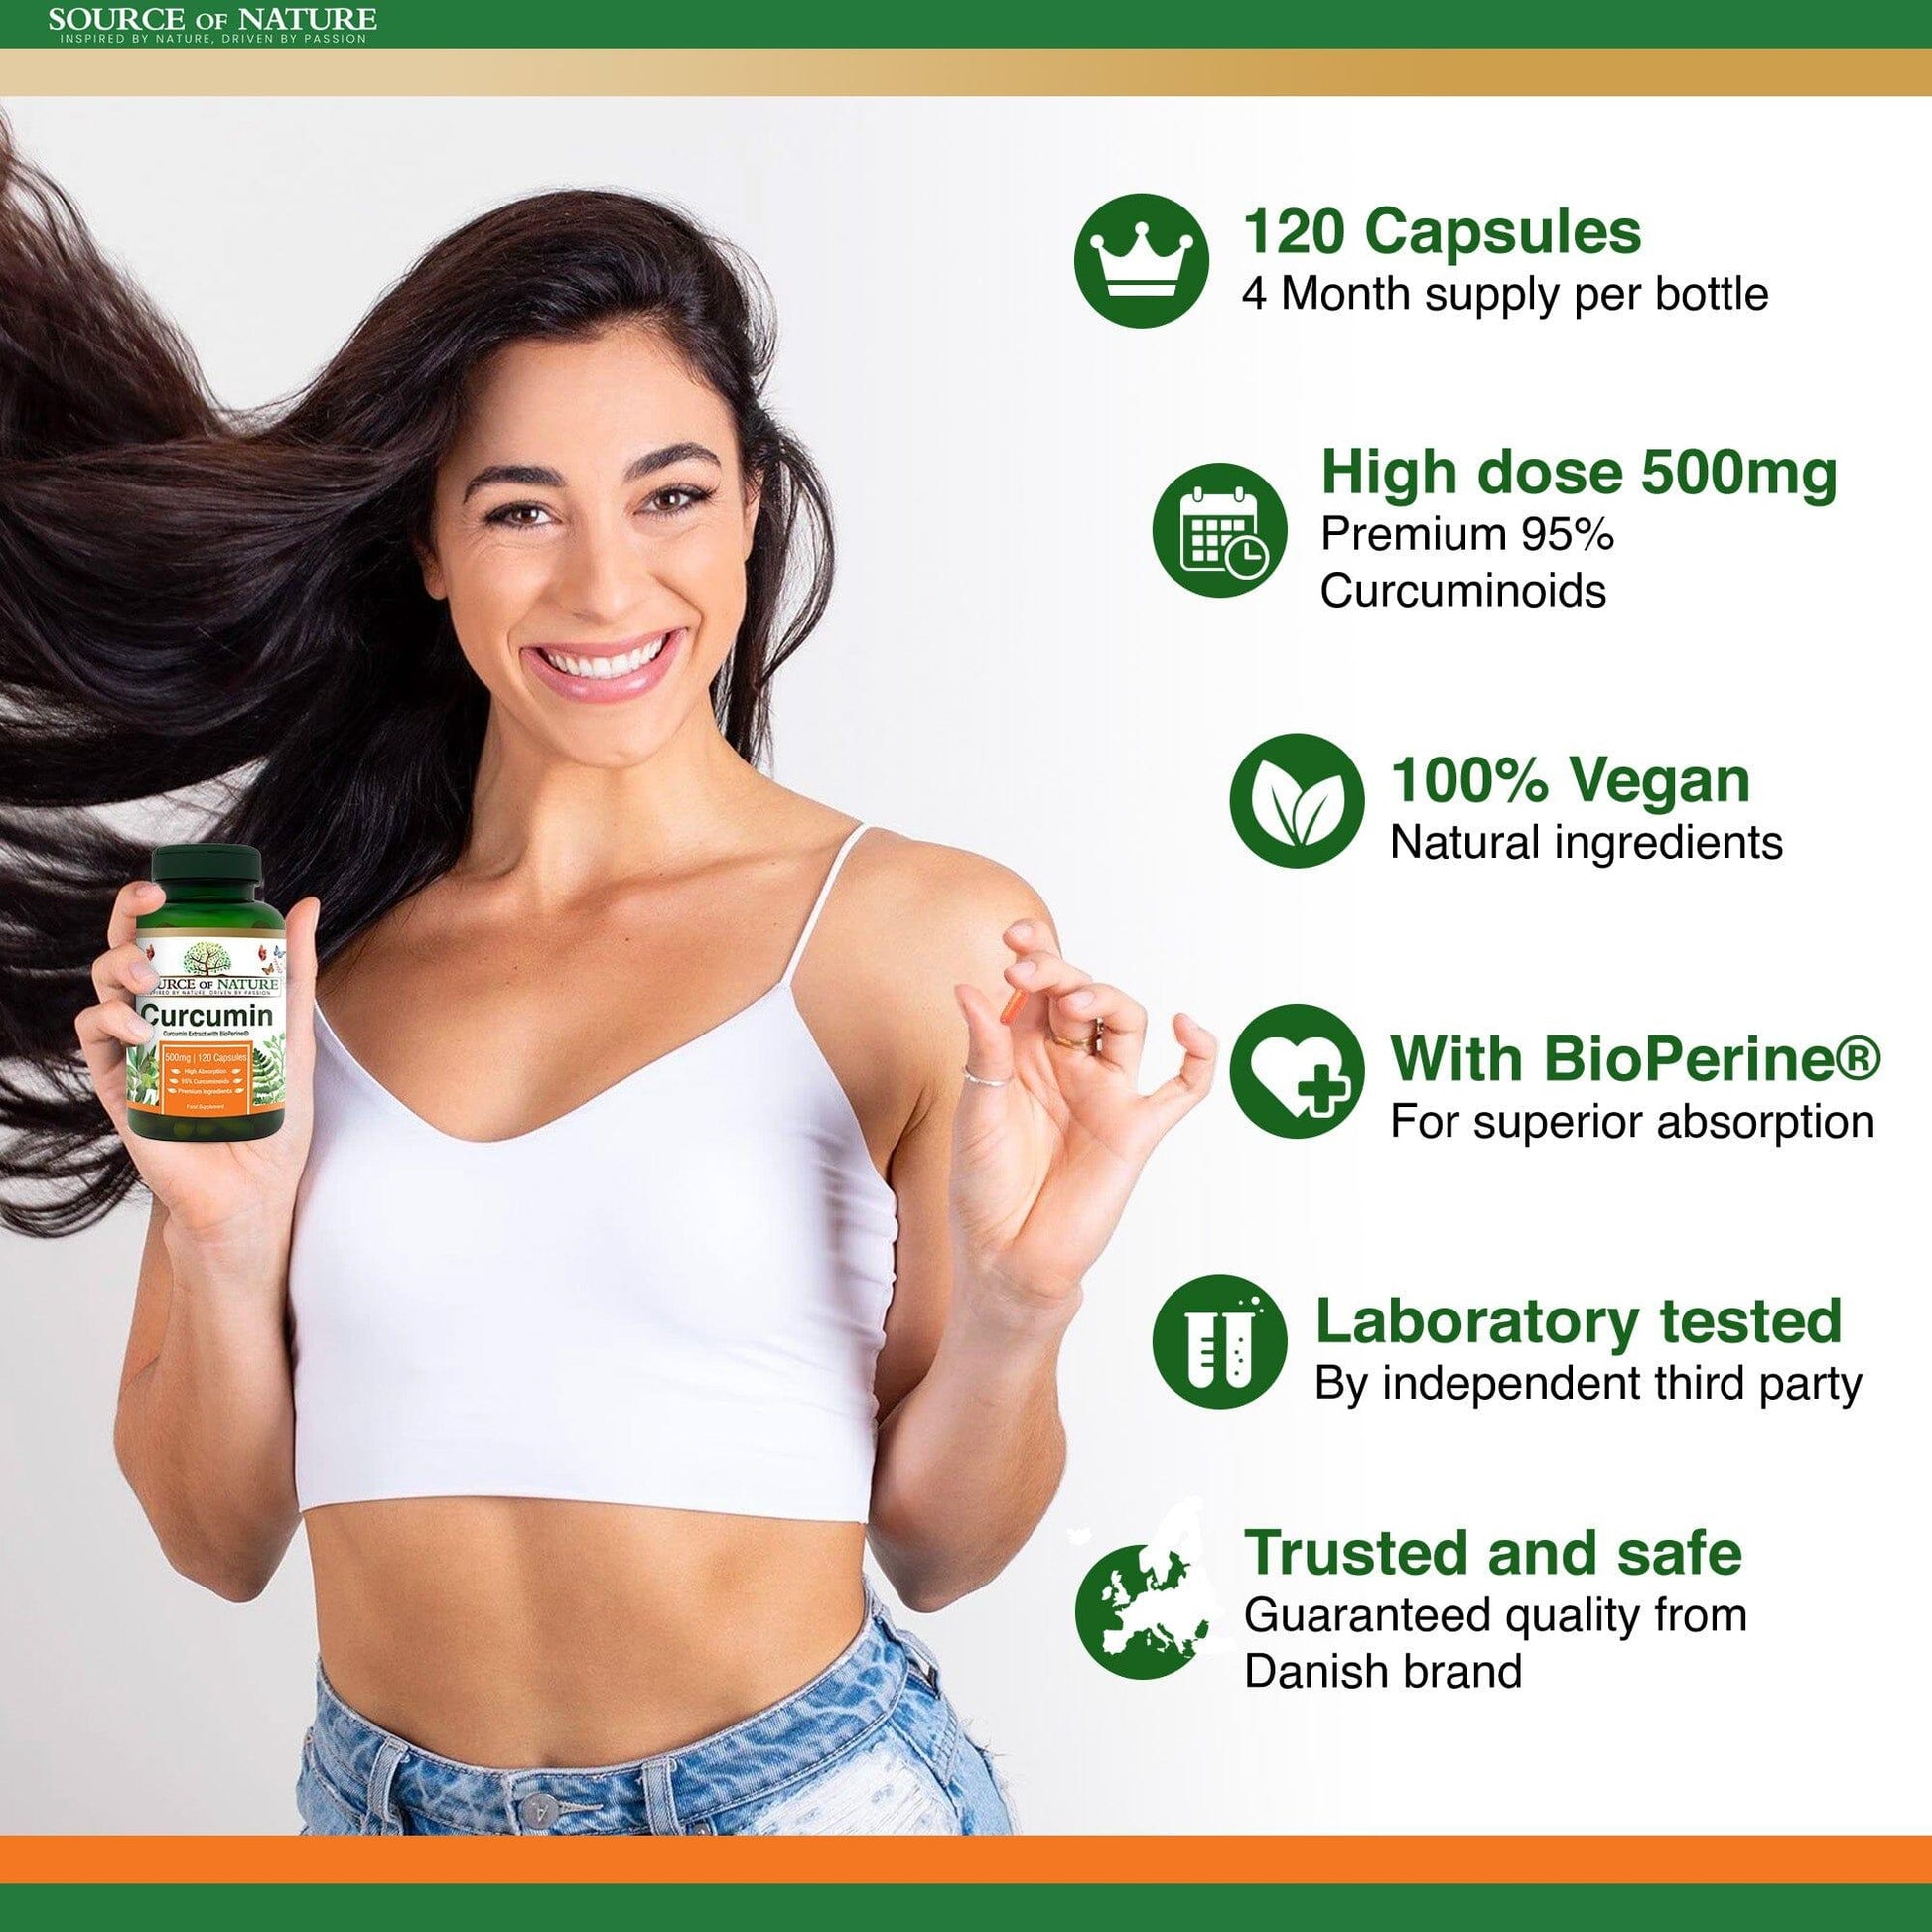 Curcumin 500mg | 120 Capsules | 4-Month Supply - Source of Nature